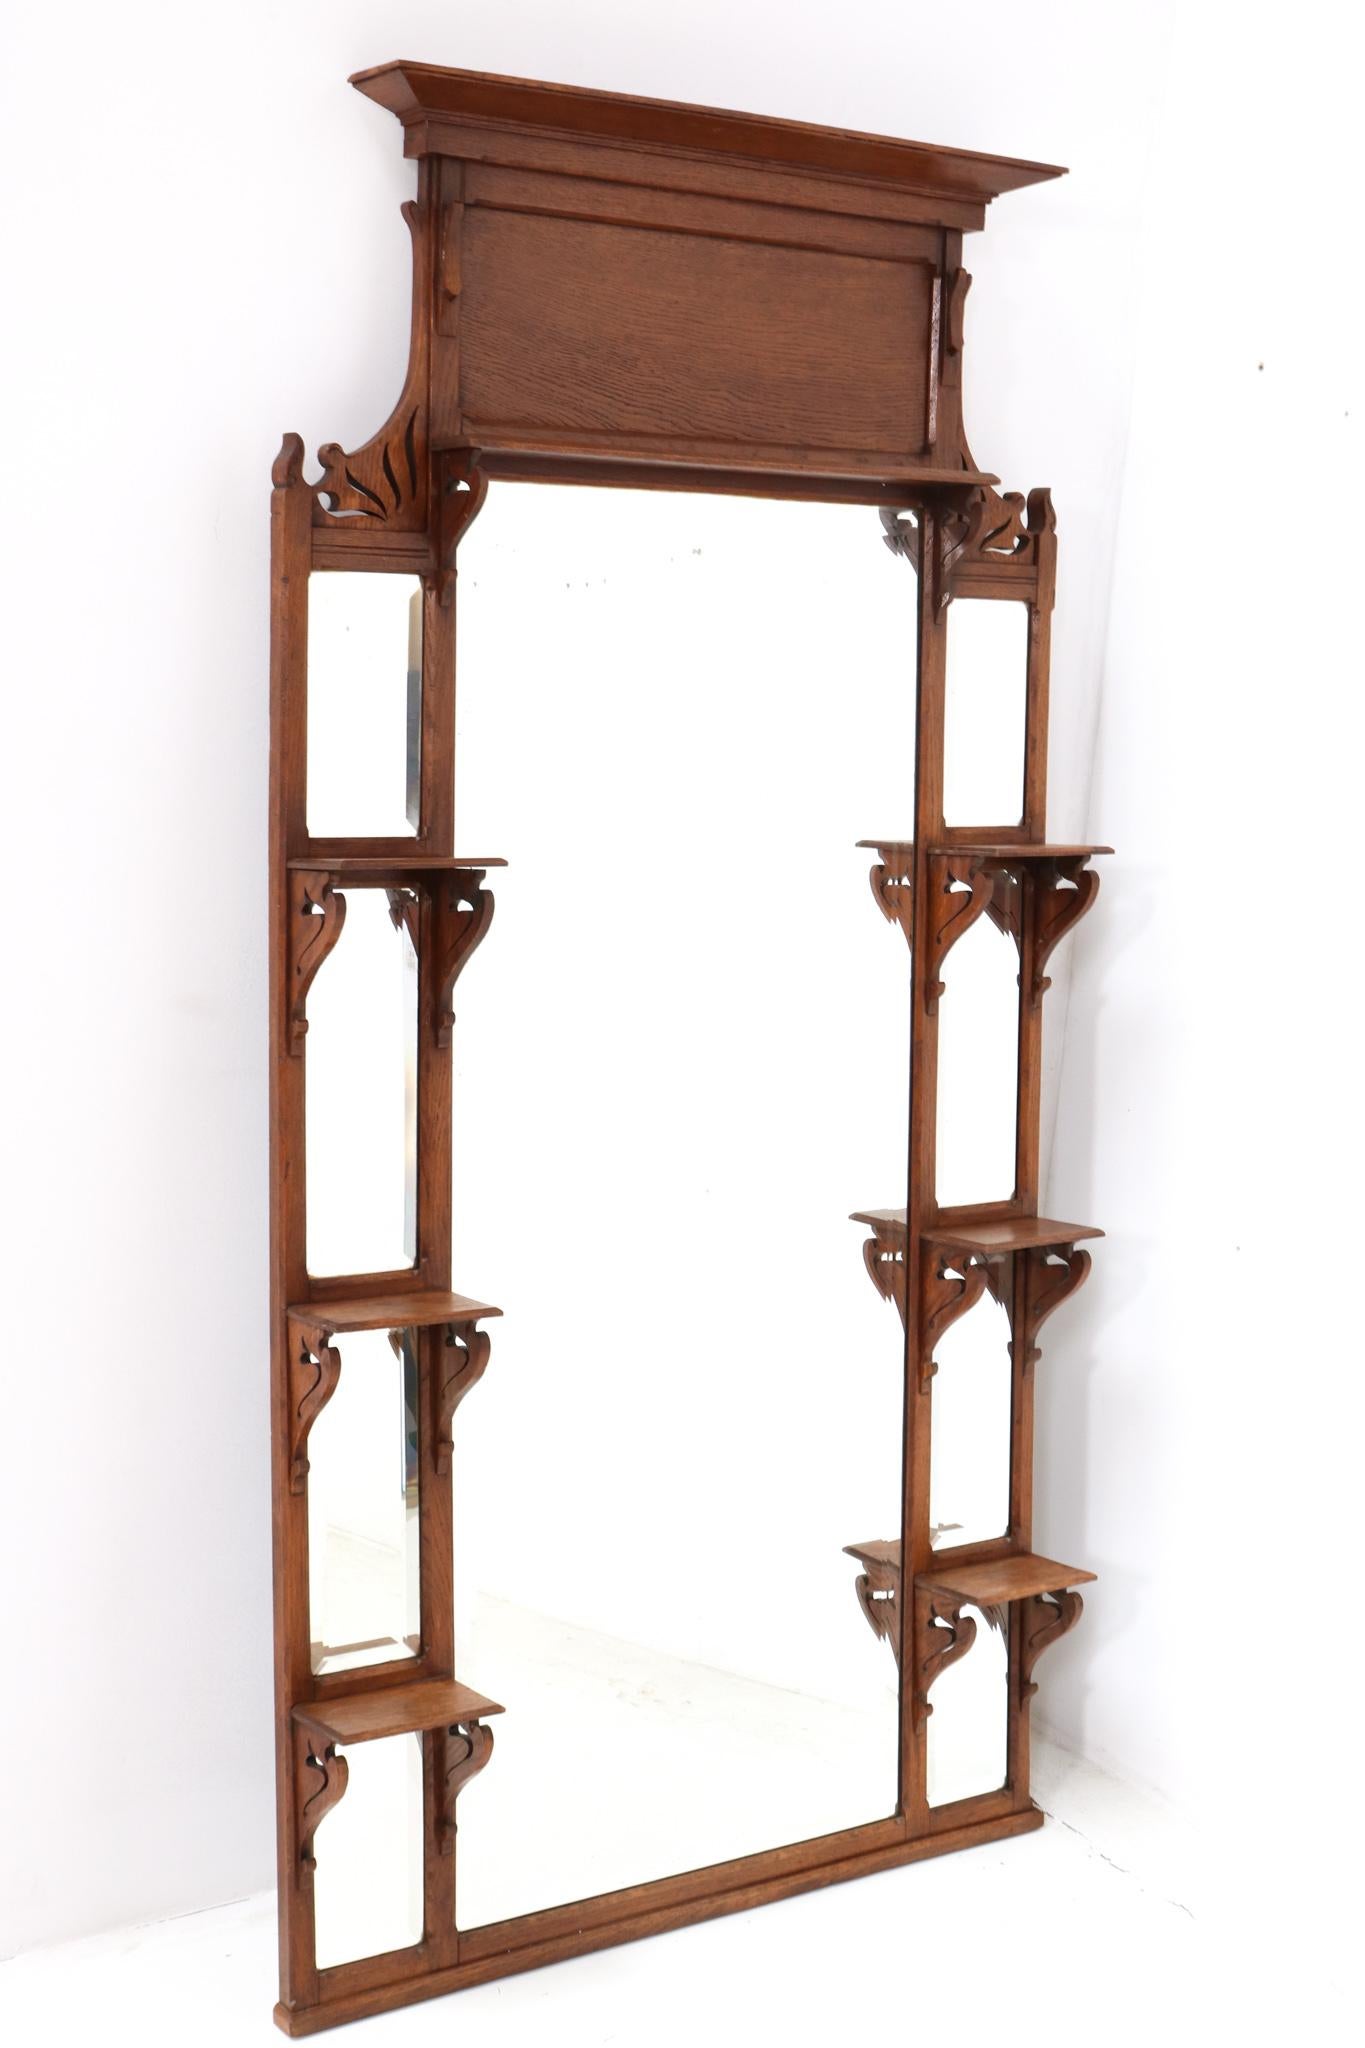 Magnificent and rare Art Nouveau trumeau or wall mirror.
Striking French design from the 1900s.
Solid oak frame with original beveled mirrored glass.
This wonderful Art Nouveau trumeau or wall mirror can also be used as
a display stand to put on